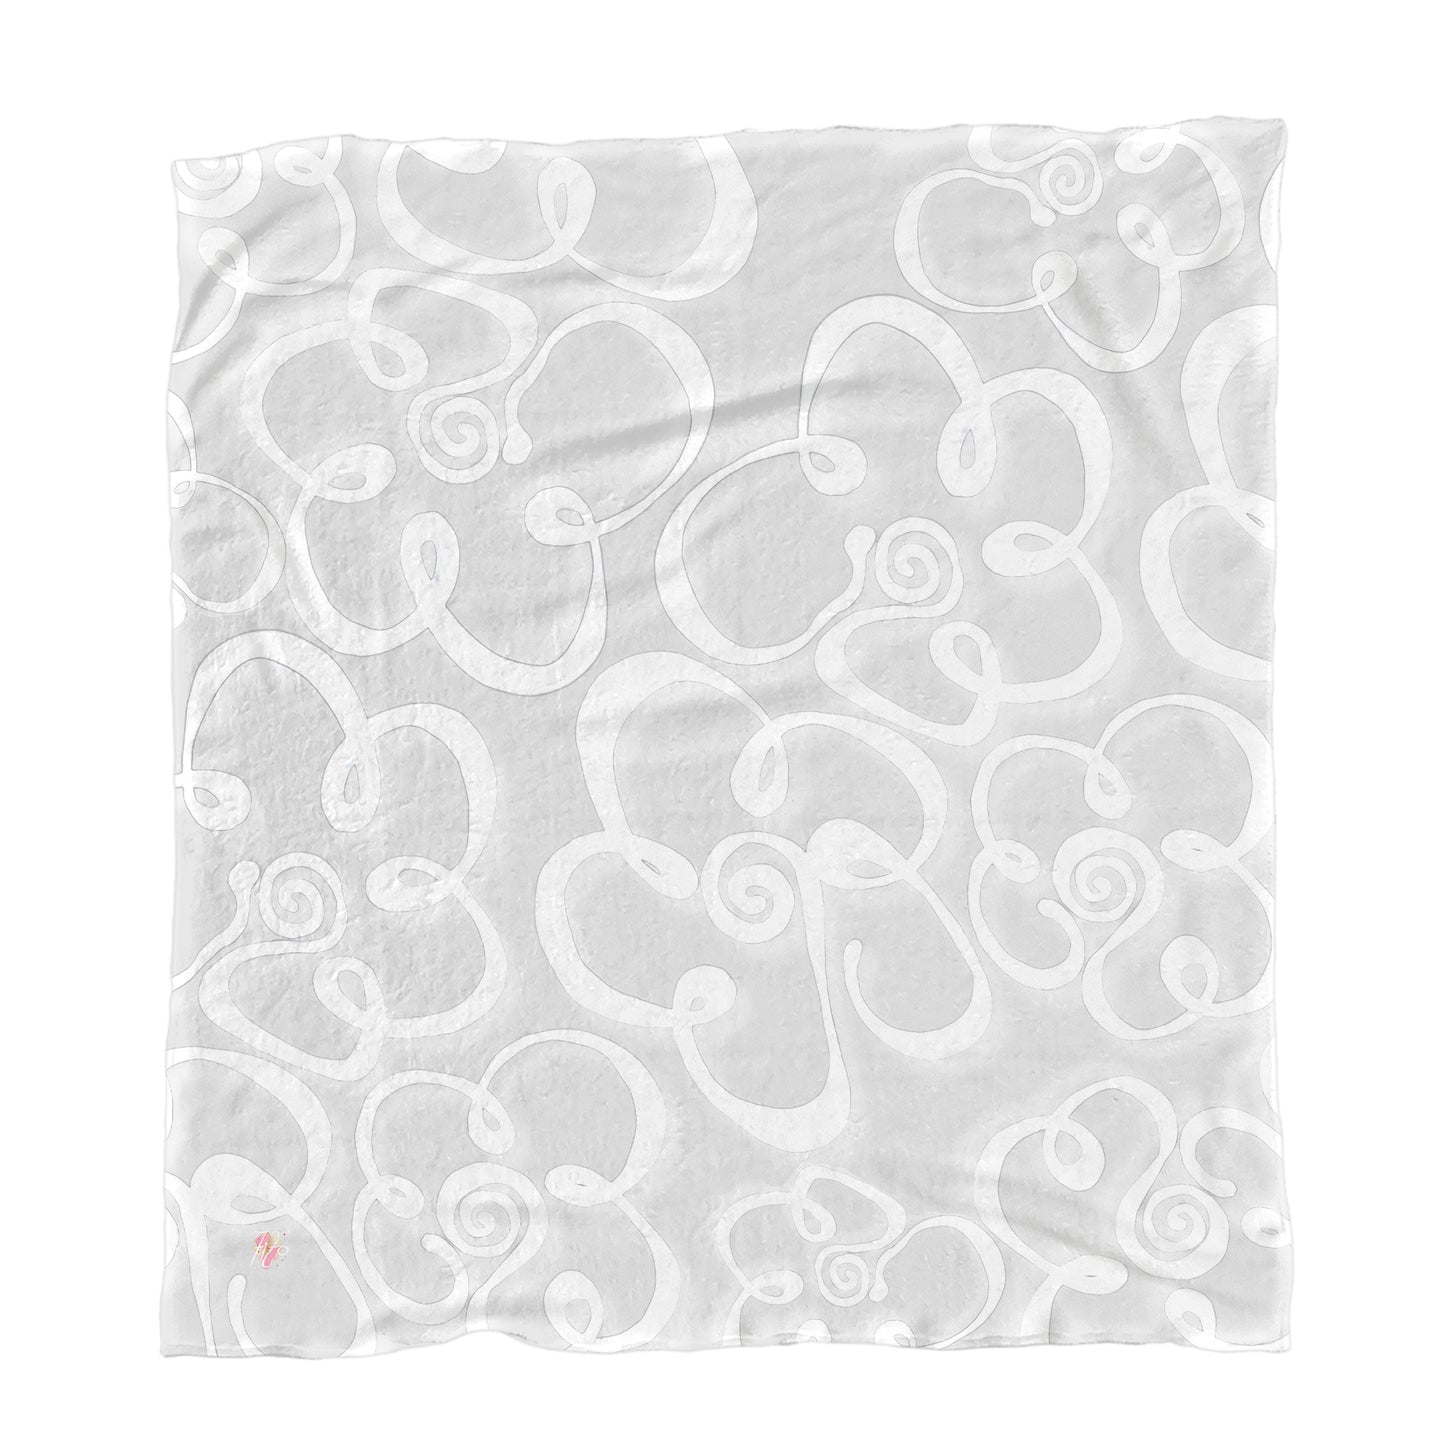 Daisies on Pale Grey Light Weight Fleece Blanket by Fifo